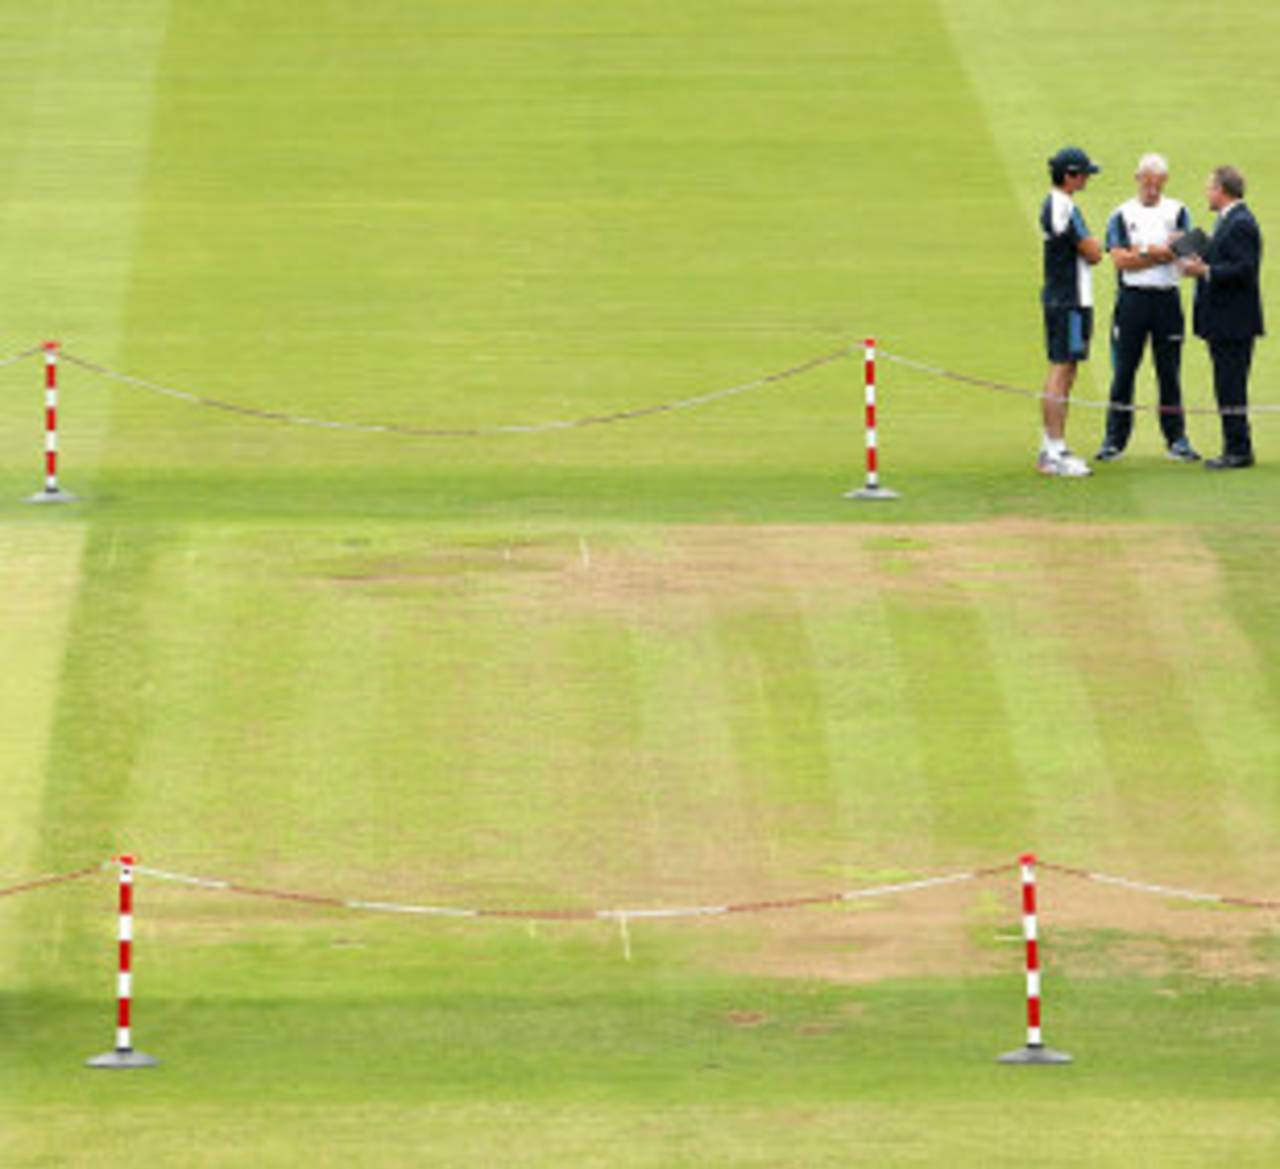 The Lord's pitch two days before the second Test, Lord's, July 15, 2014